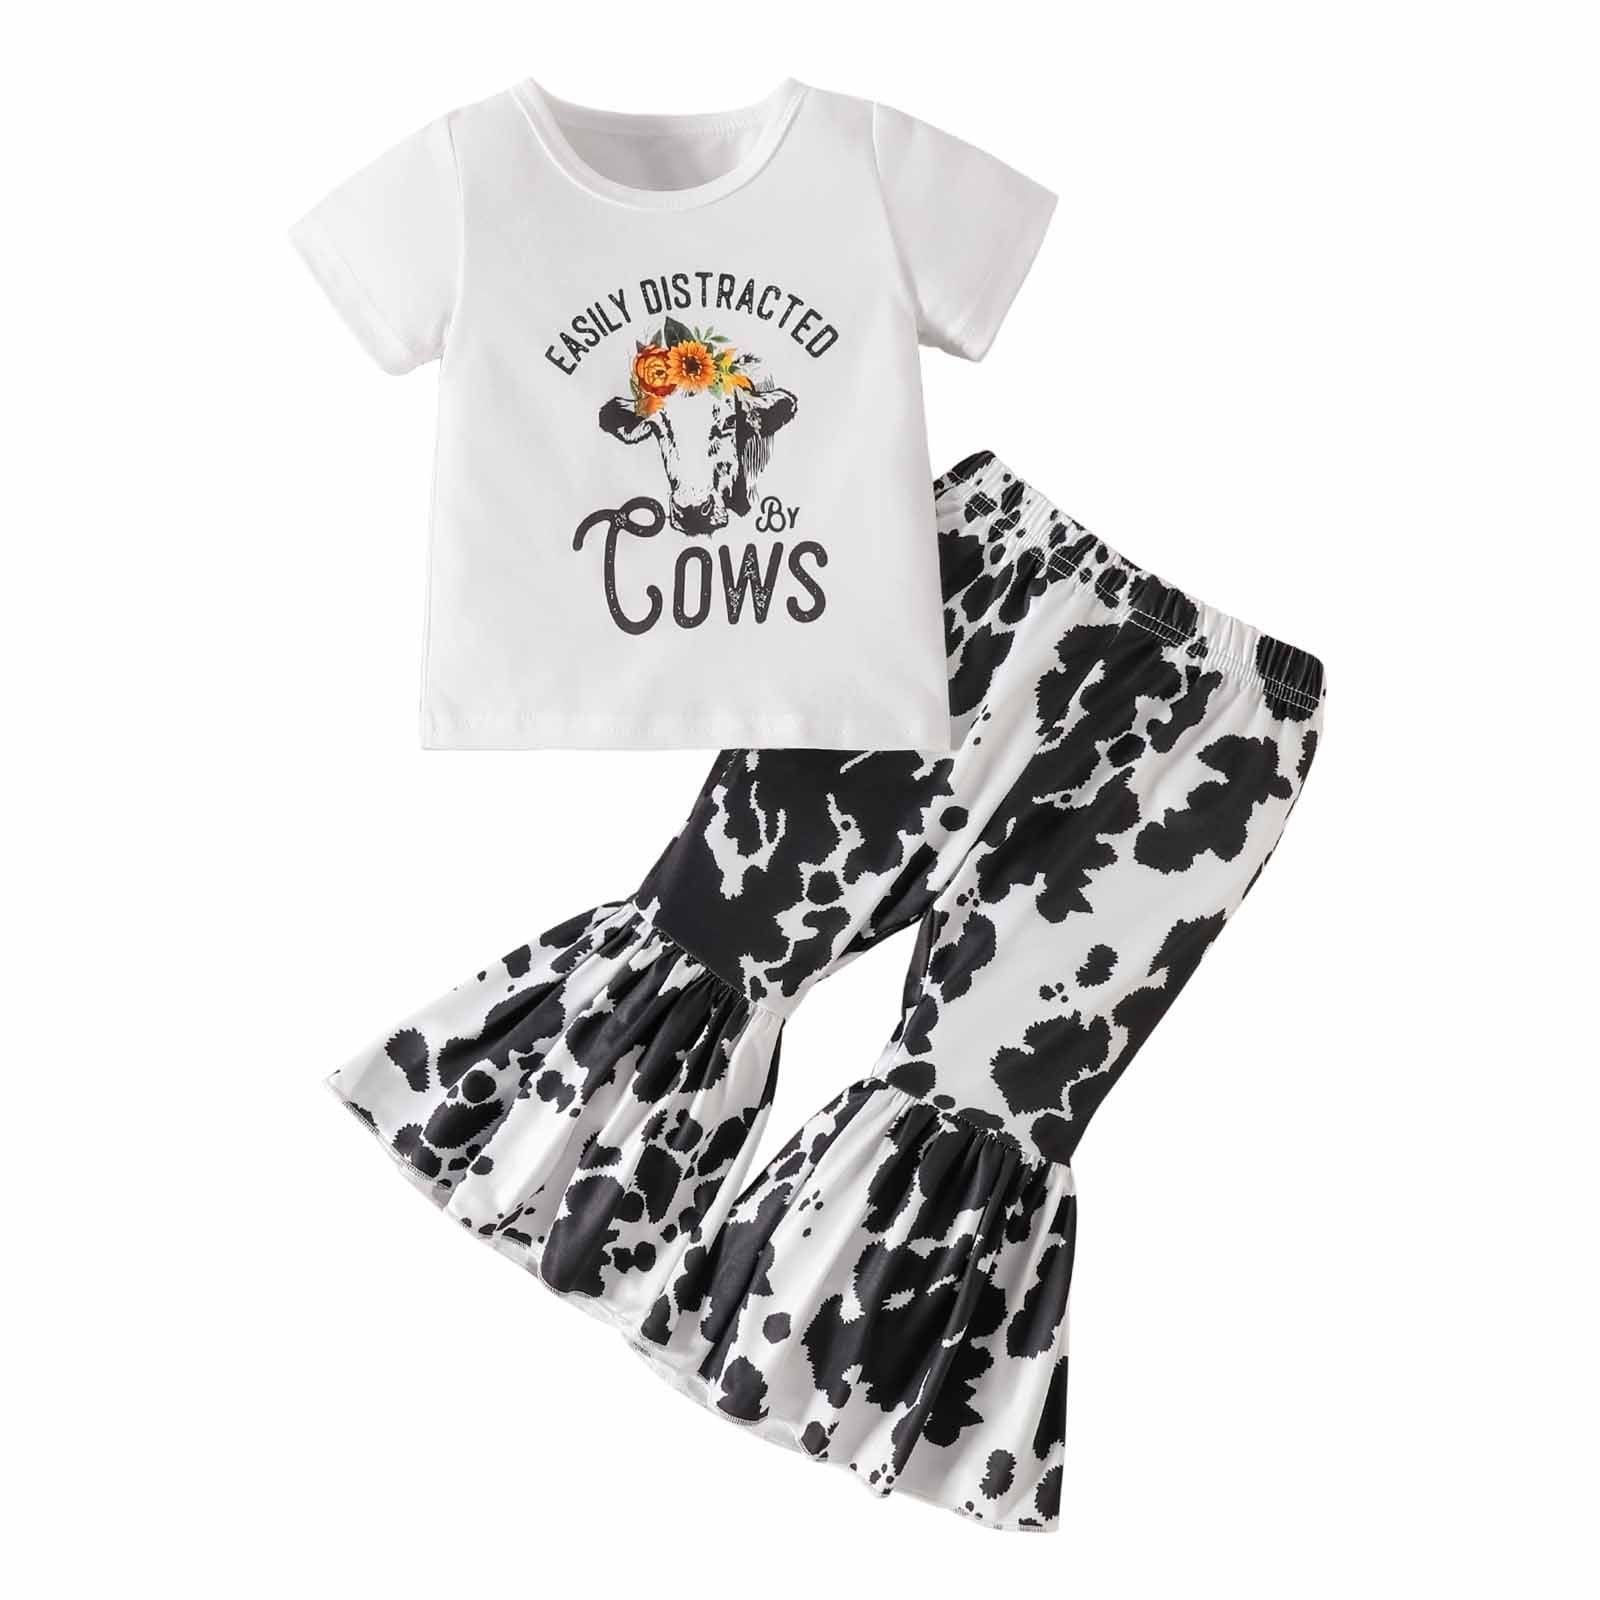 White top dogs bell bottom pants cute girls clothes – Western kids